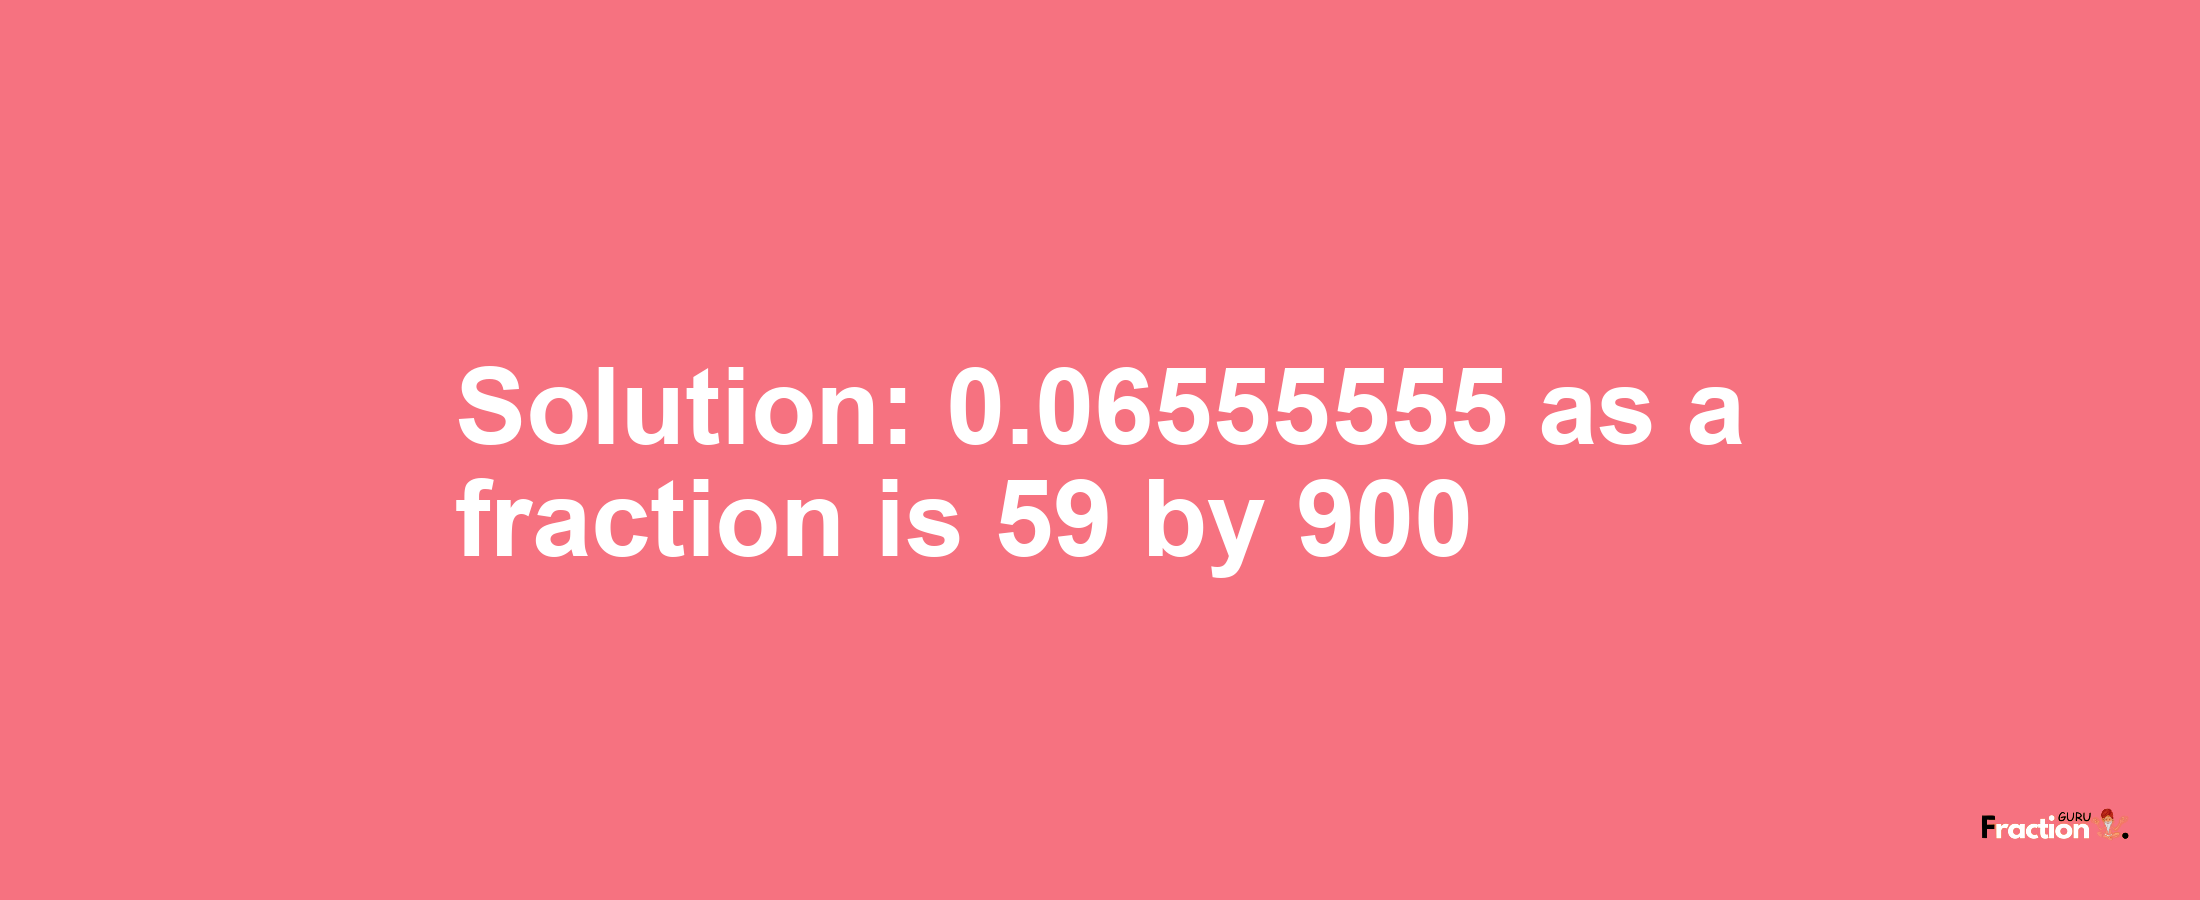 Solution:0.06555555 as a fraction is 59/900